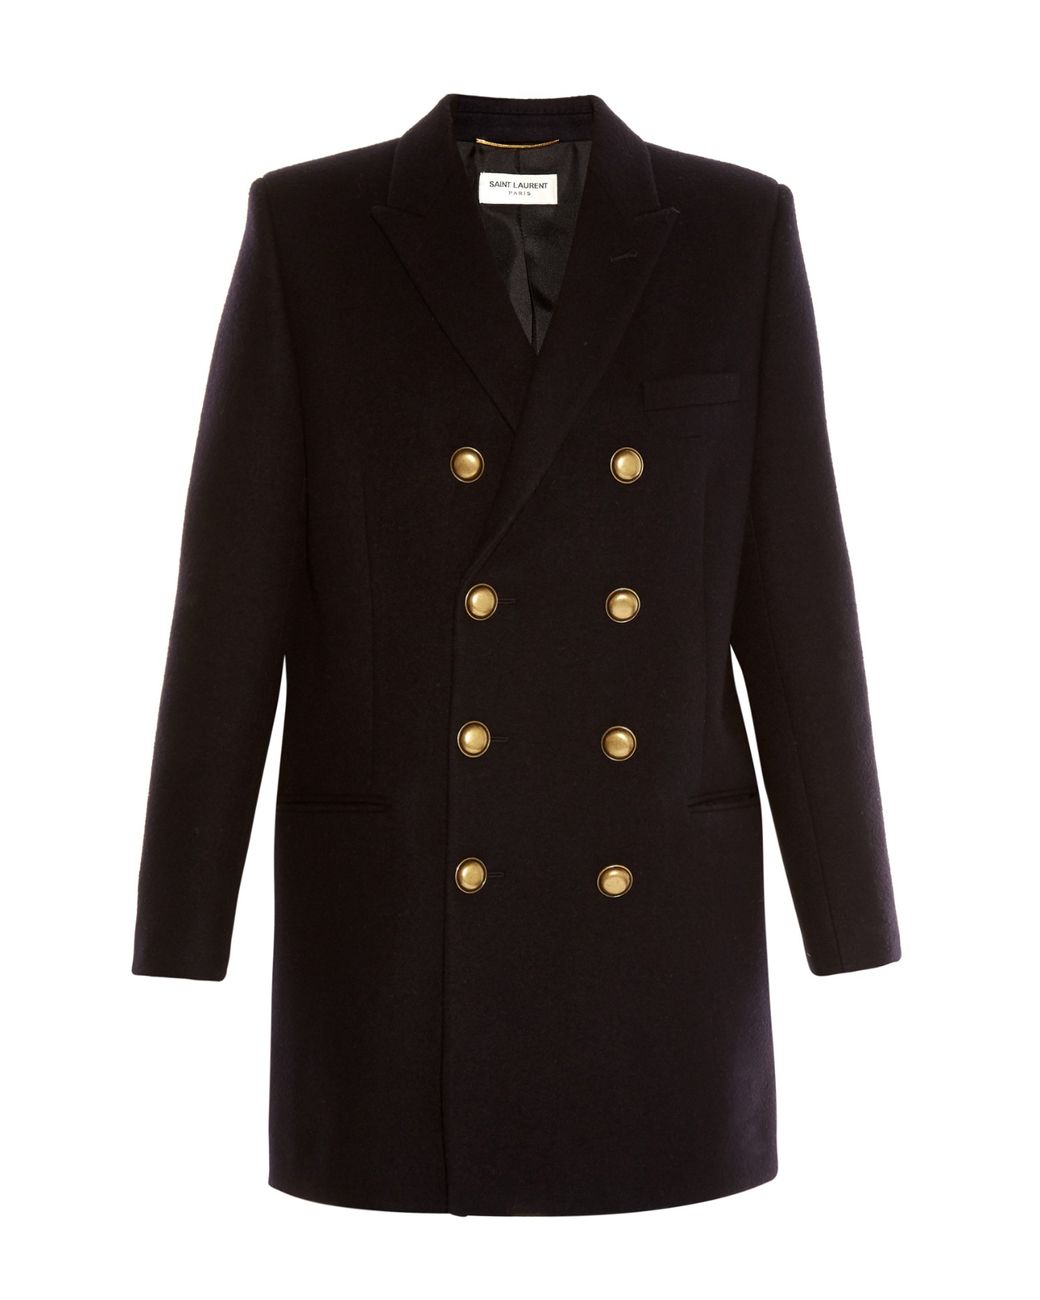 Saint Laurent Military Double-breasted Pea Coat in Black | Lyst Canada